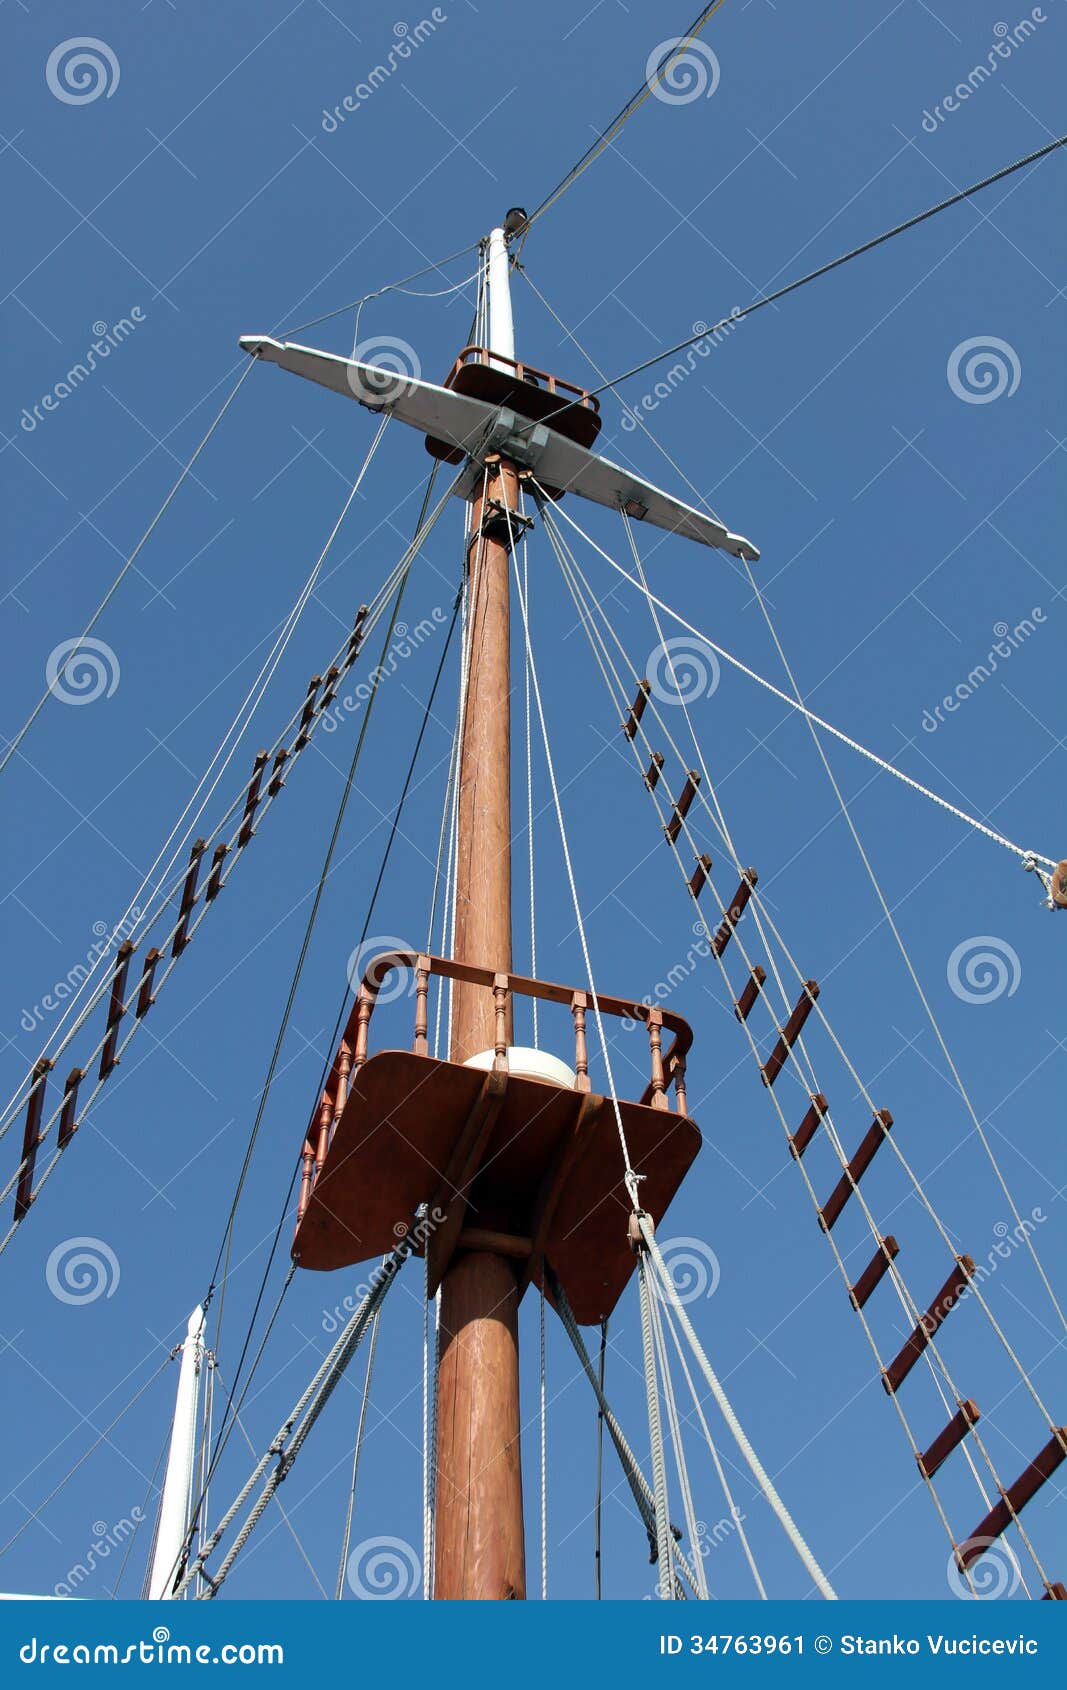 Sailing mast of traditional vintage wooden tall ships.